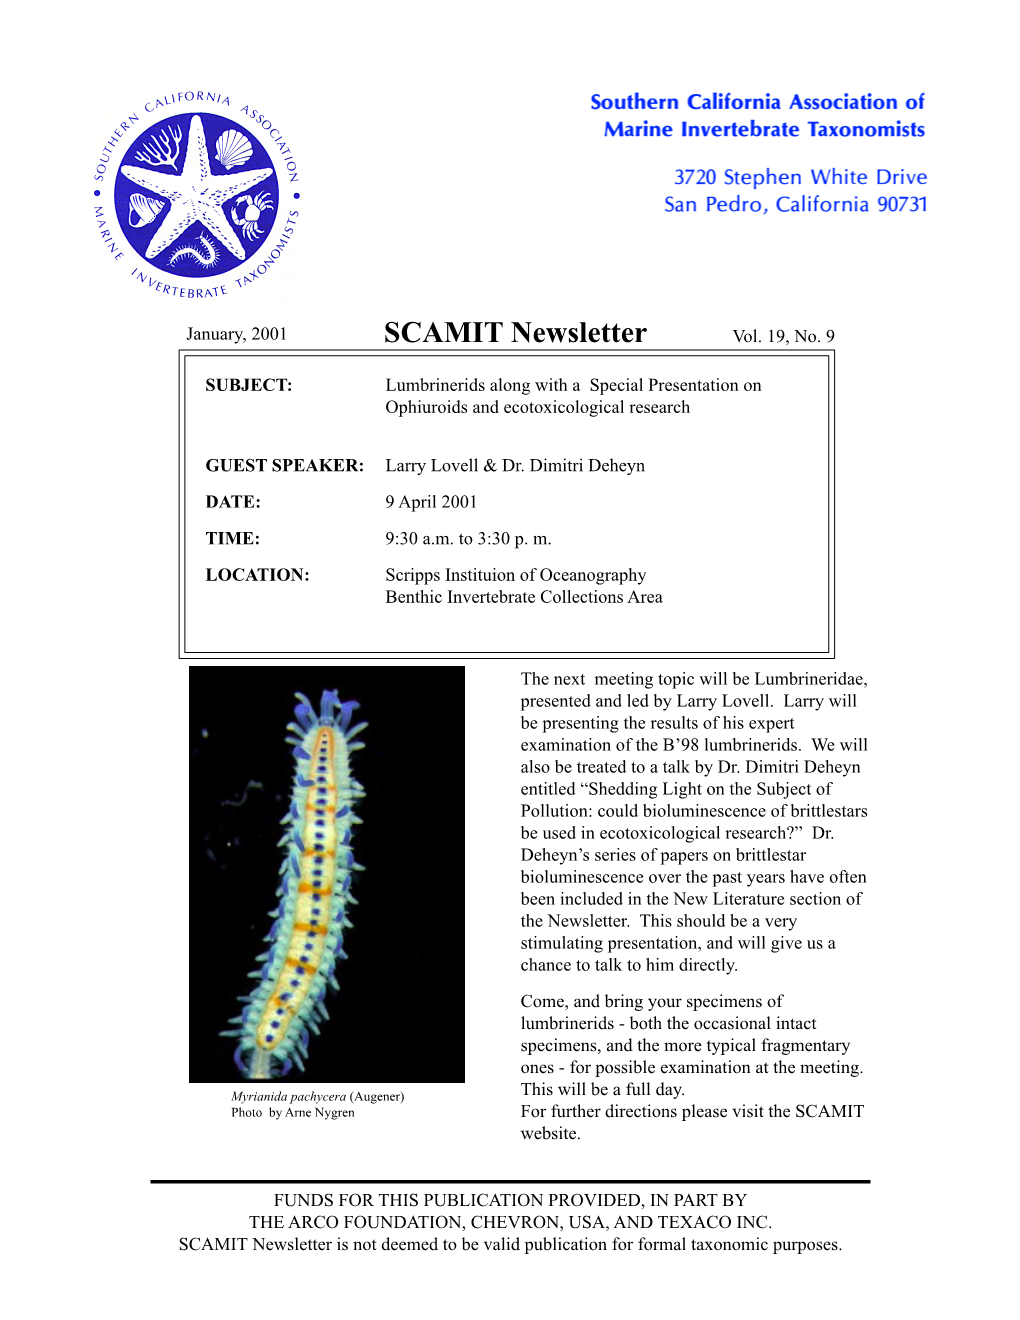 SCAMIT Newsletter Vol. 19 No. 9 2001 January